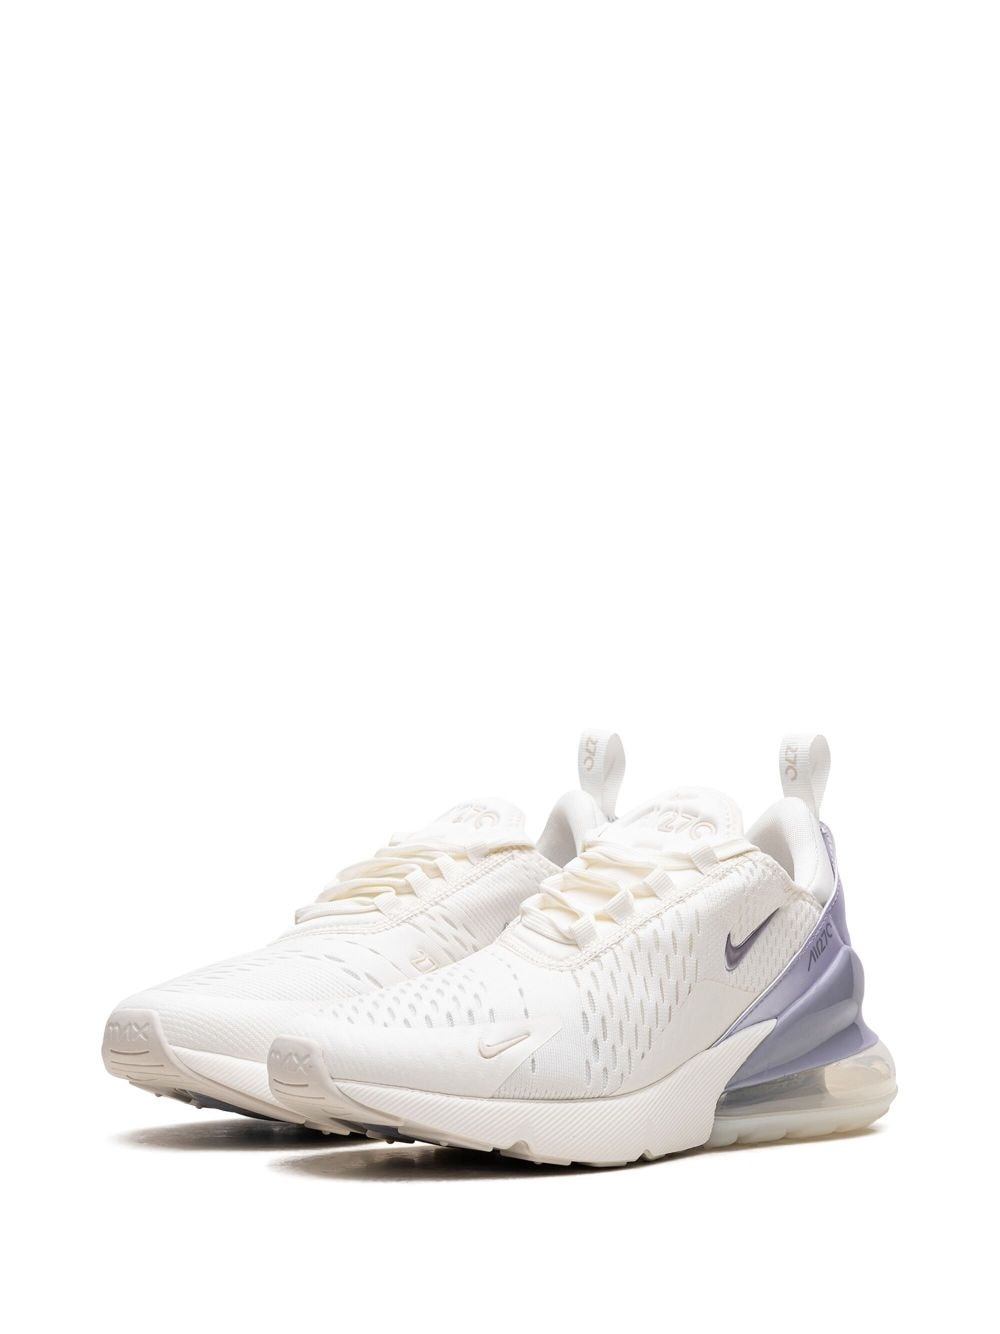 Air Max 270 "Oxygen Purple" sneakers - 5